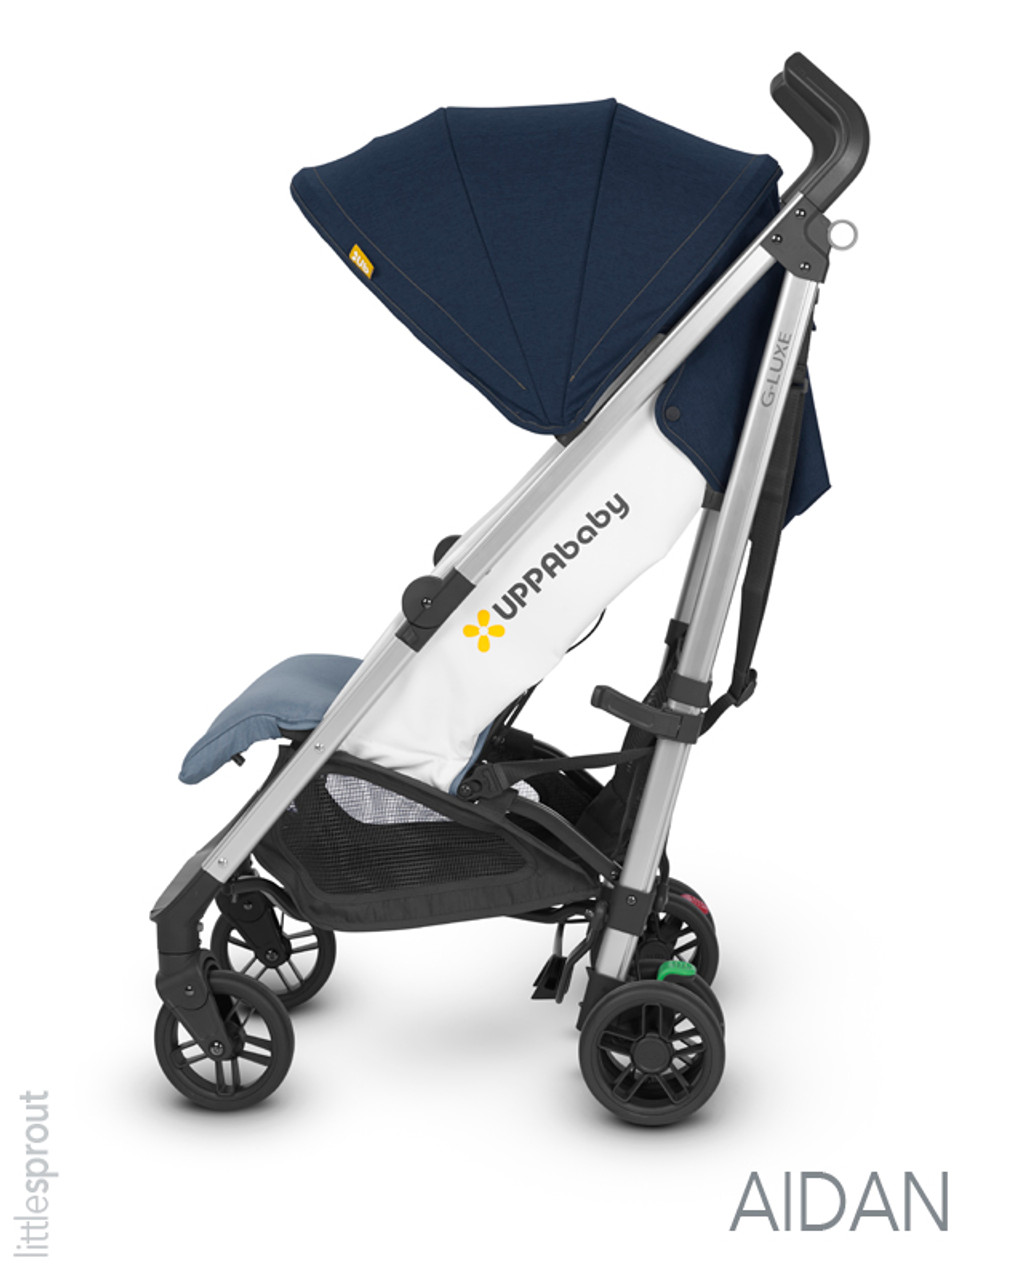 uppababy g luxe double stroller